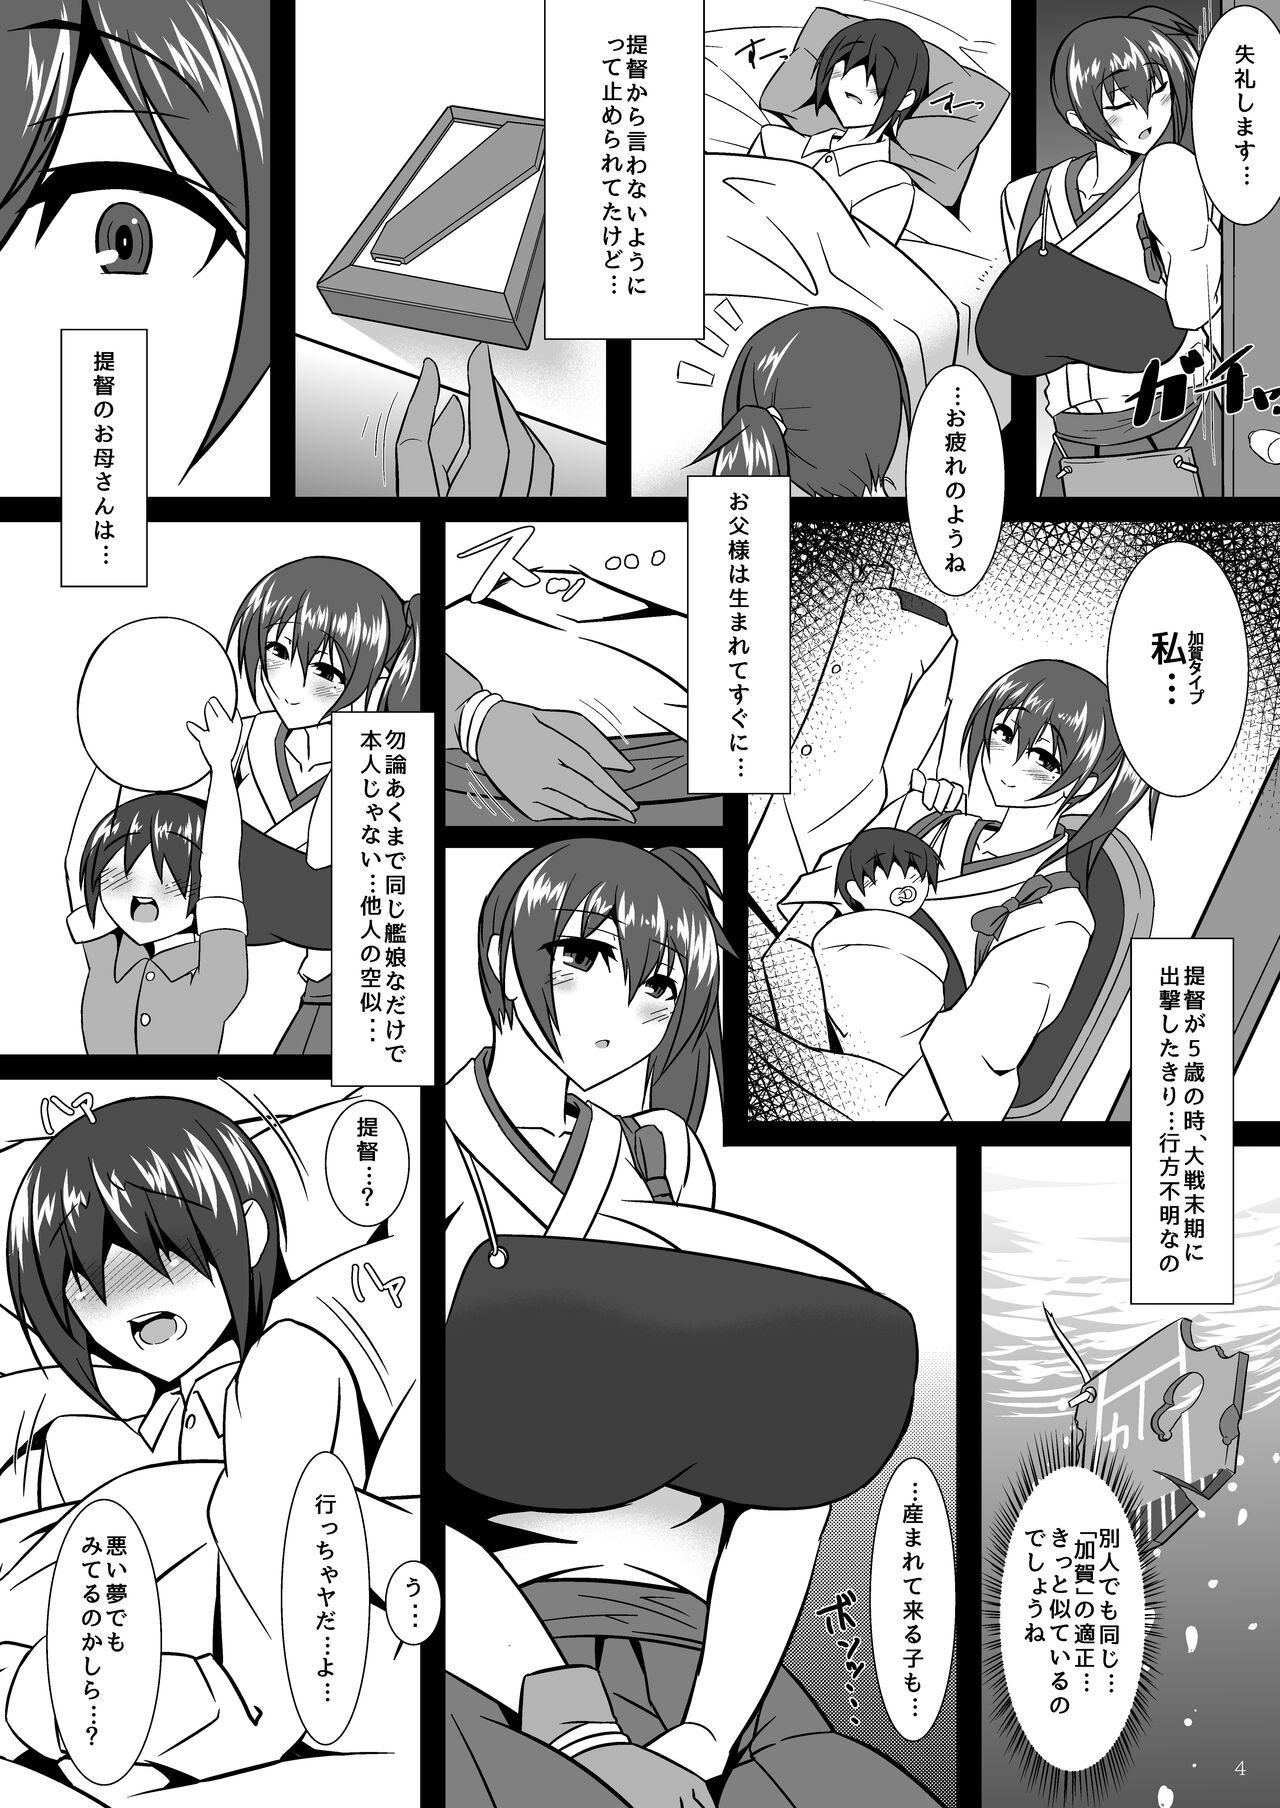 Smoking Bote Colle 4 - Kantai collection Muscle - Page 4